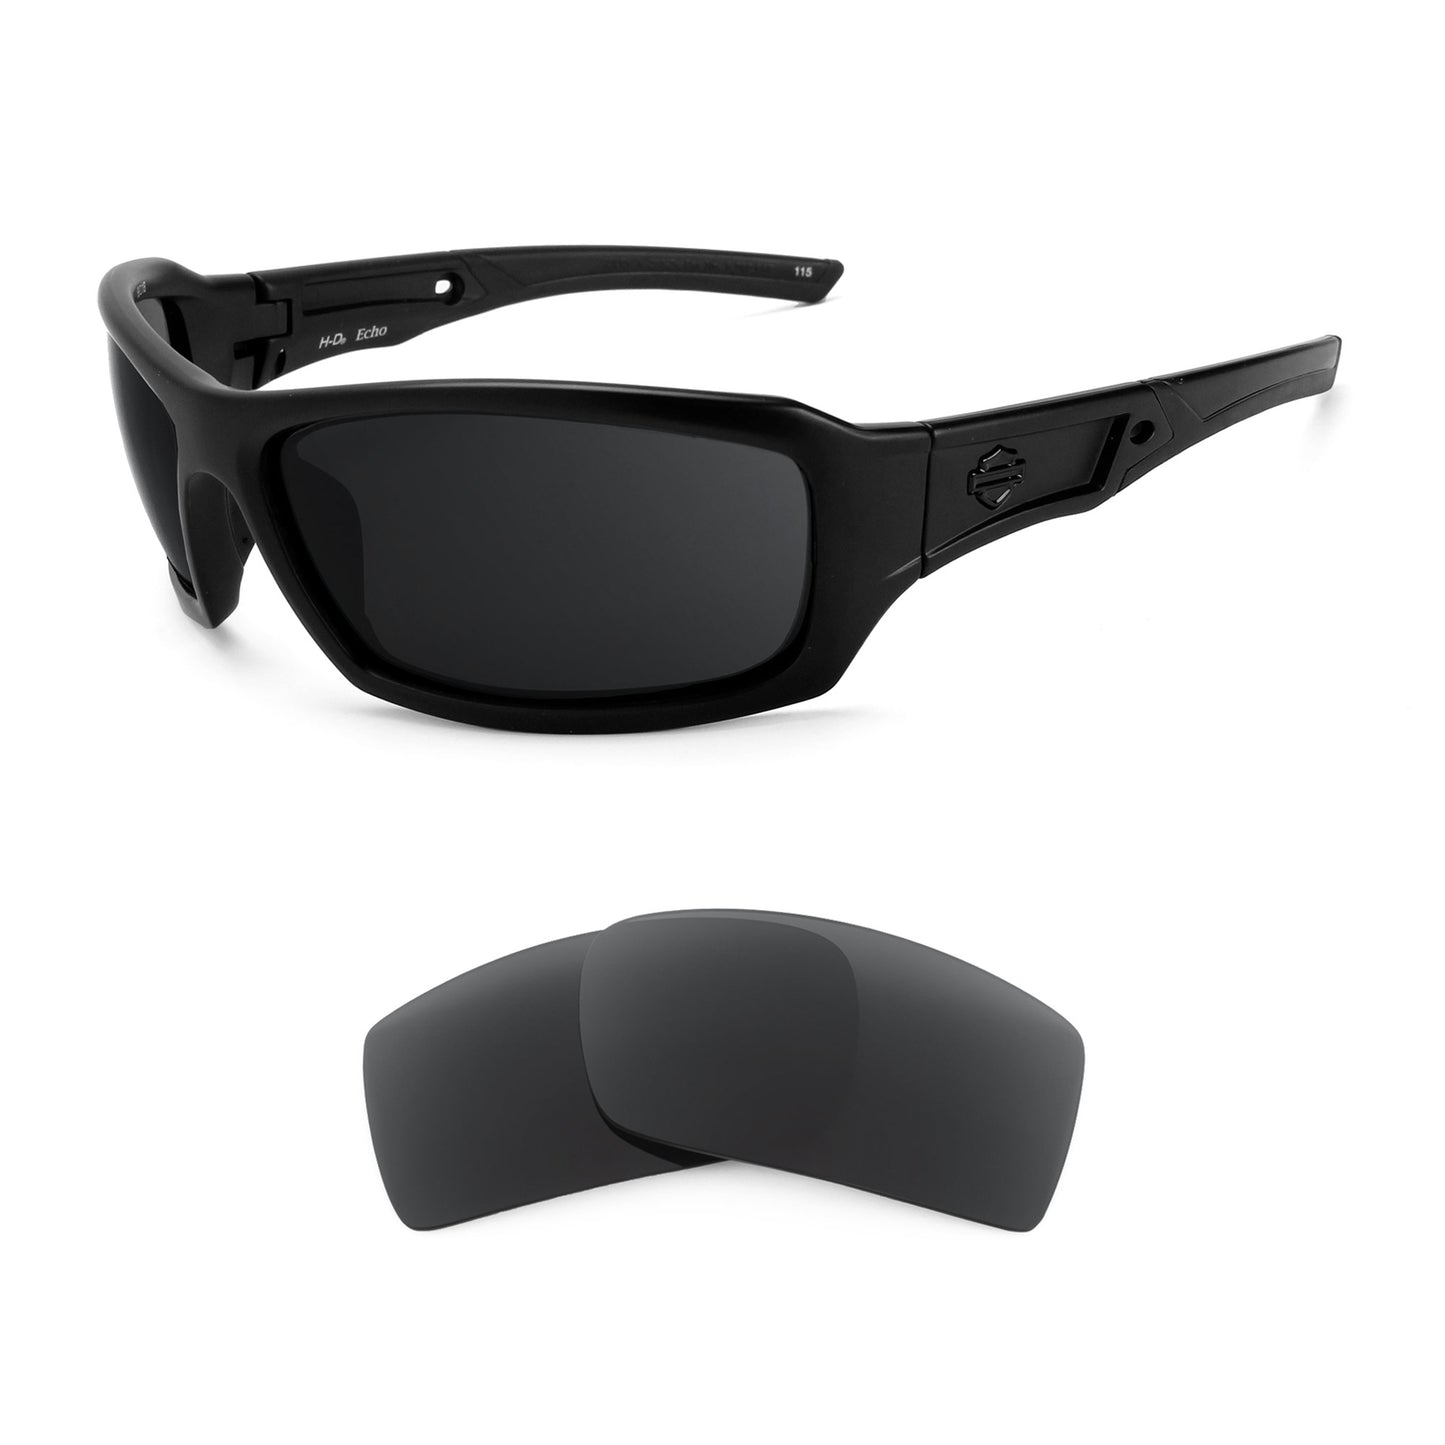 Harley Davidson Echo sunglasses with replacement lenses